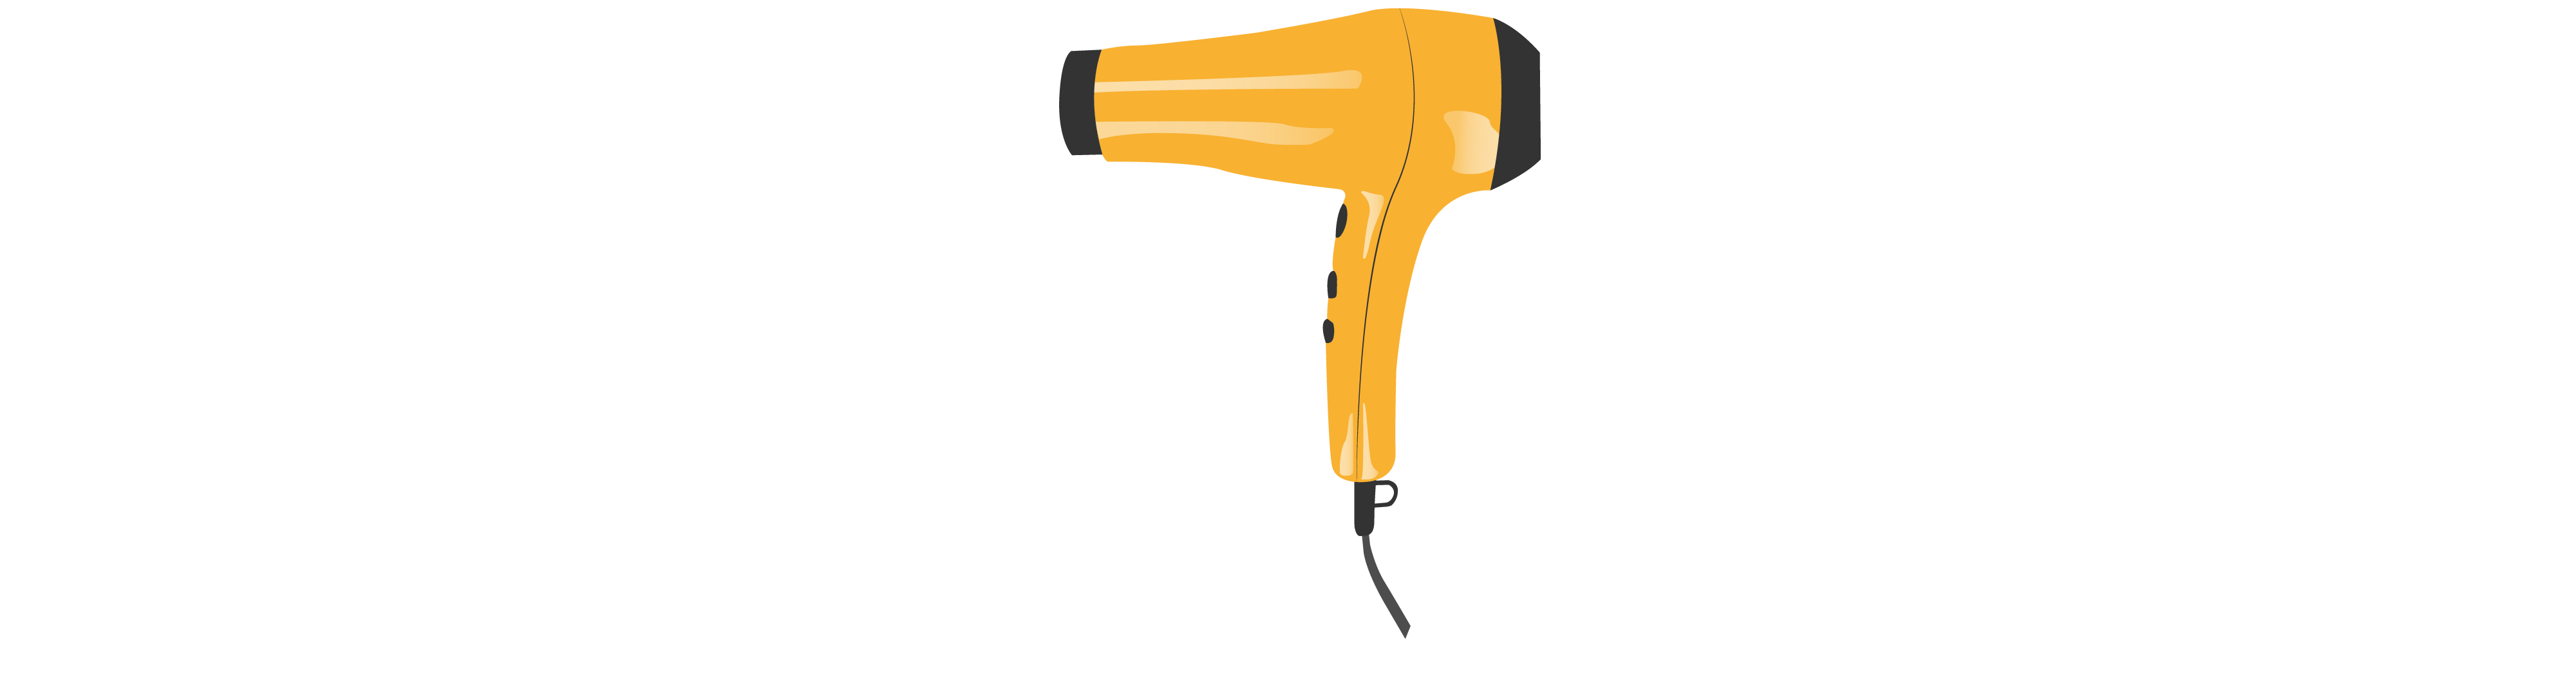 Side view of a yellow hair dryer with black detailing. The black detailing on the buttons indicate interaction points.